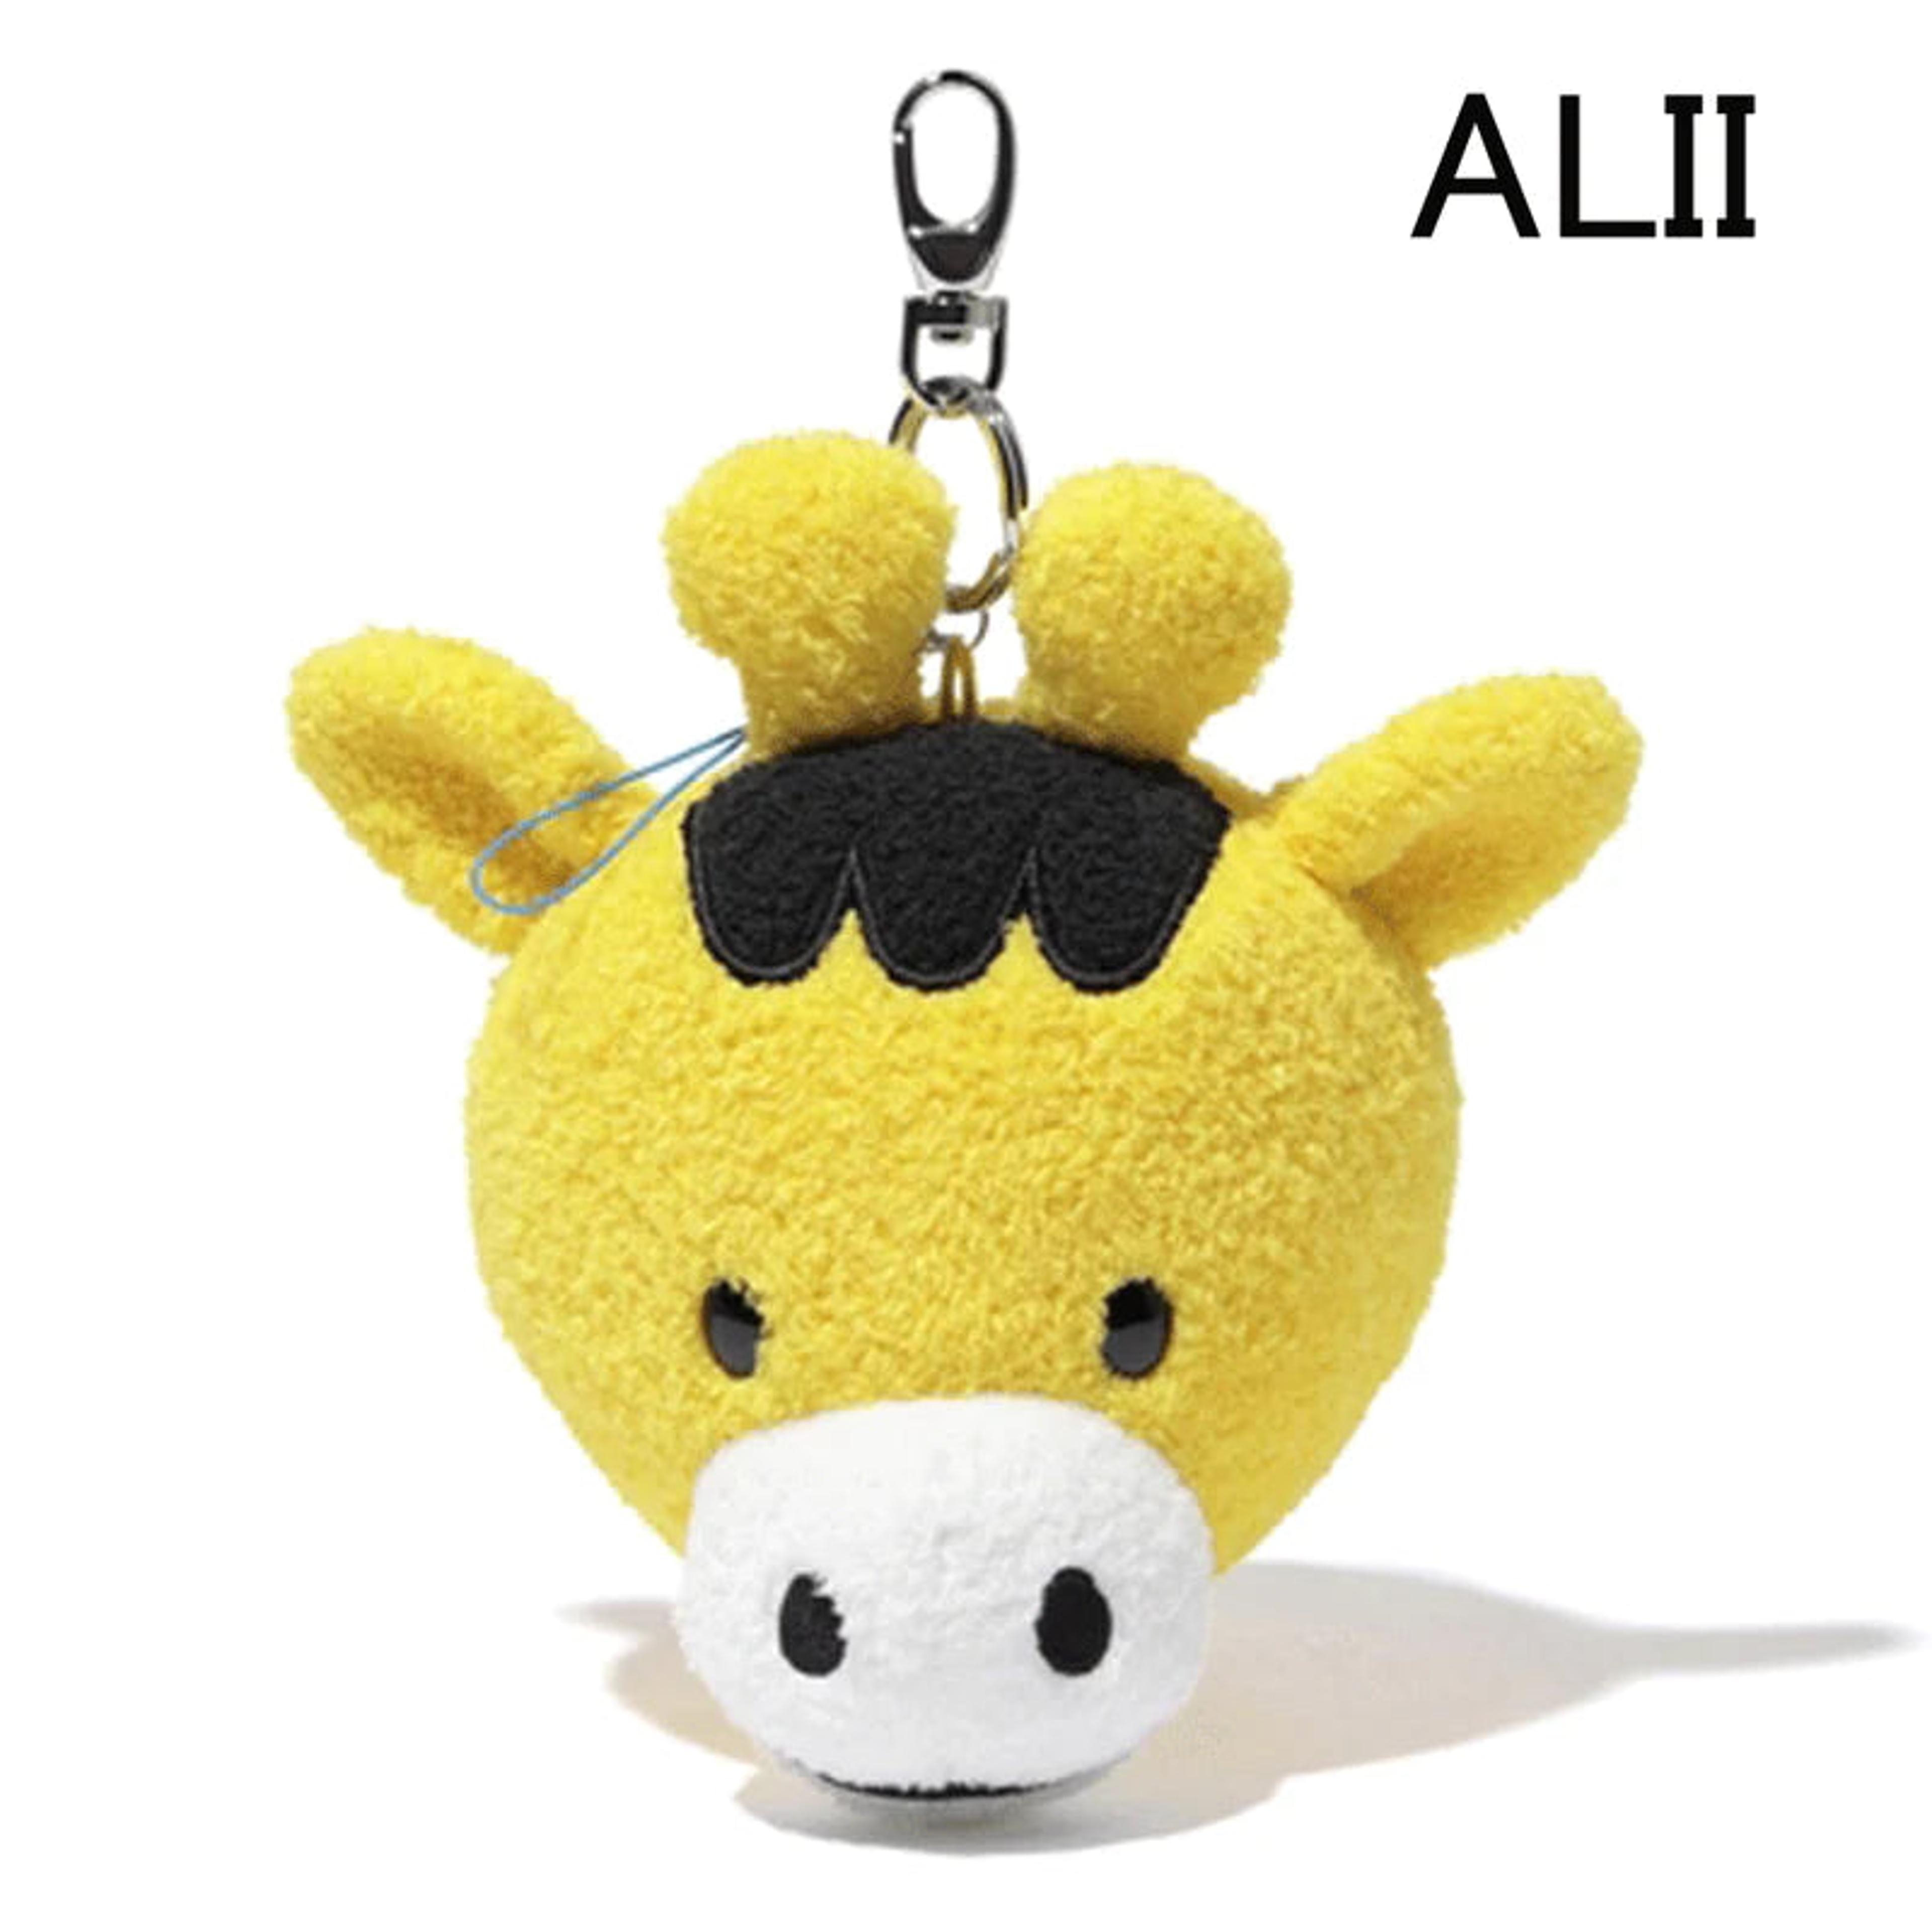 Alternate View 6 of A BATHING APE Goods BABY MILO STORE KEY CHAIN FACE PLUSH